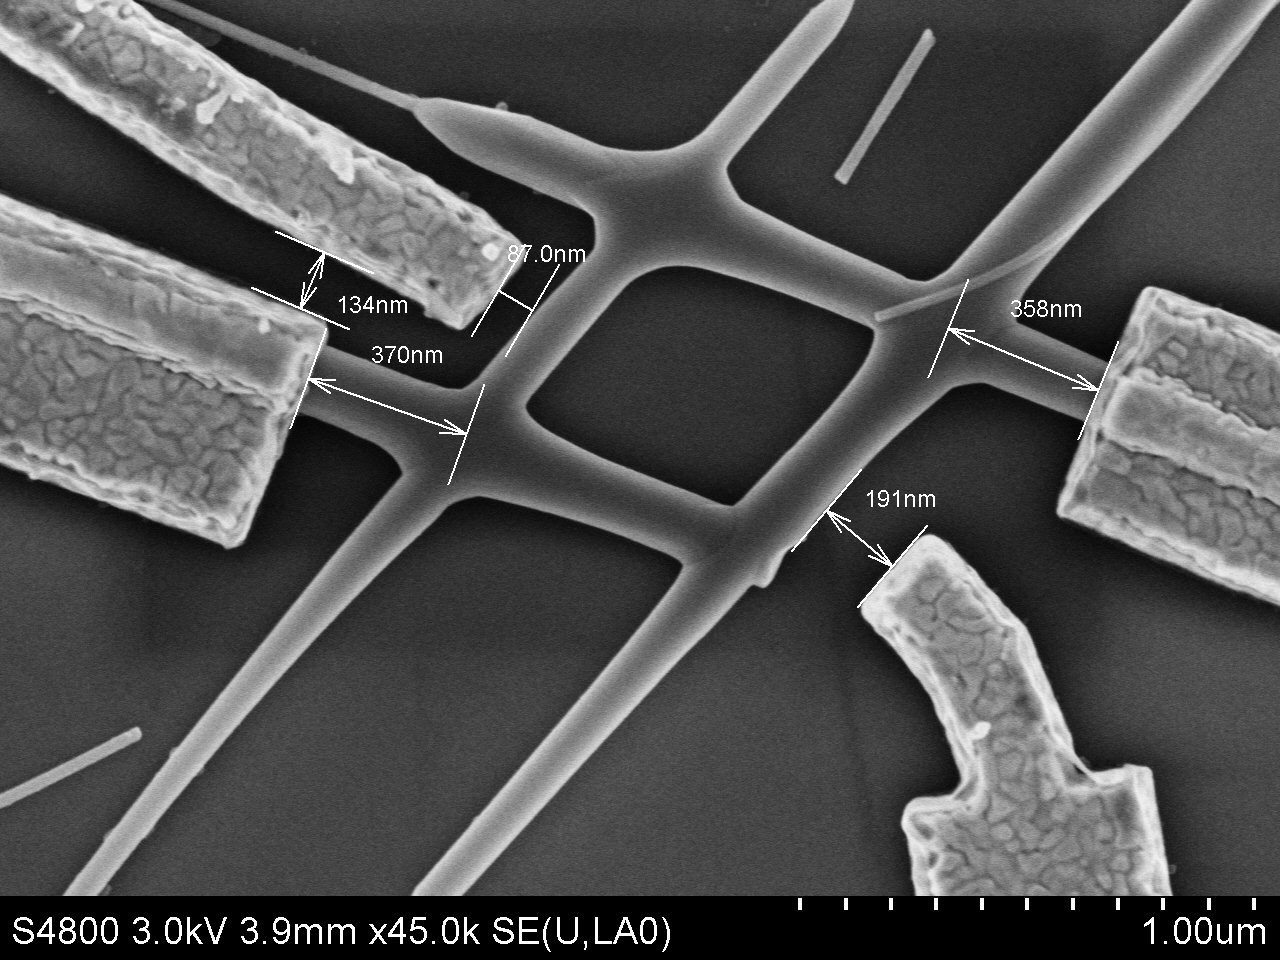 Image with scanning electron microscope of the chip with the 'hashtag' clearly visible